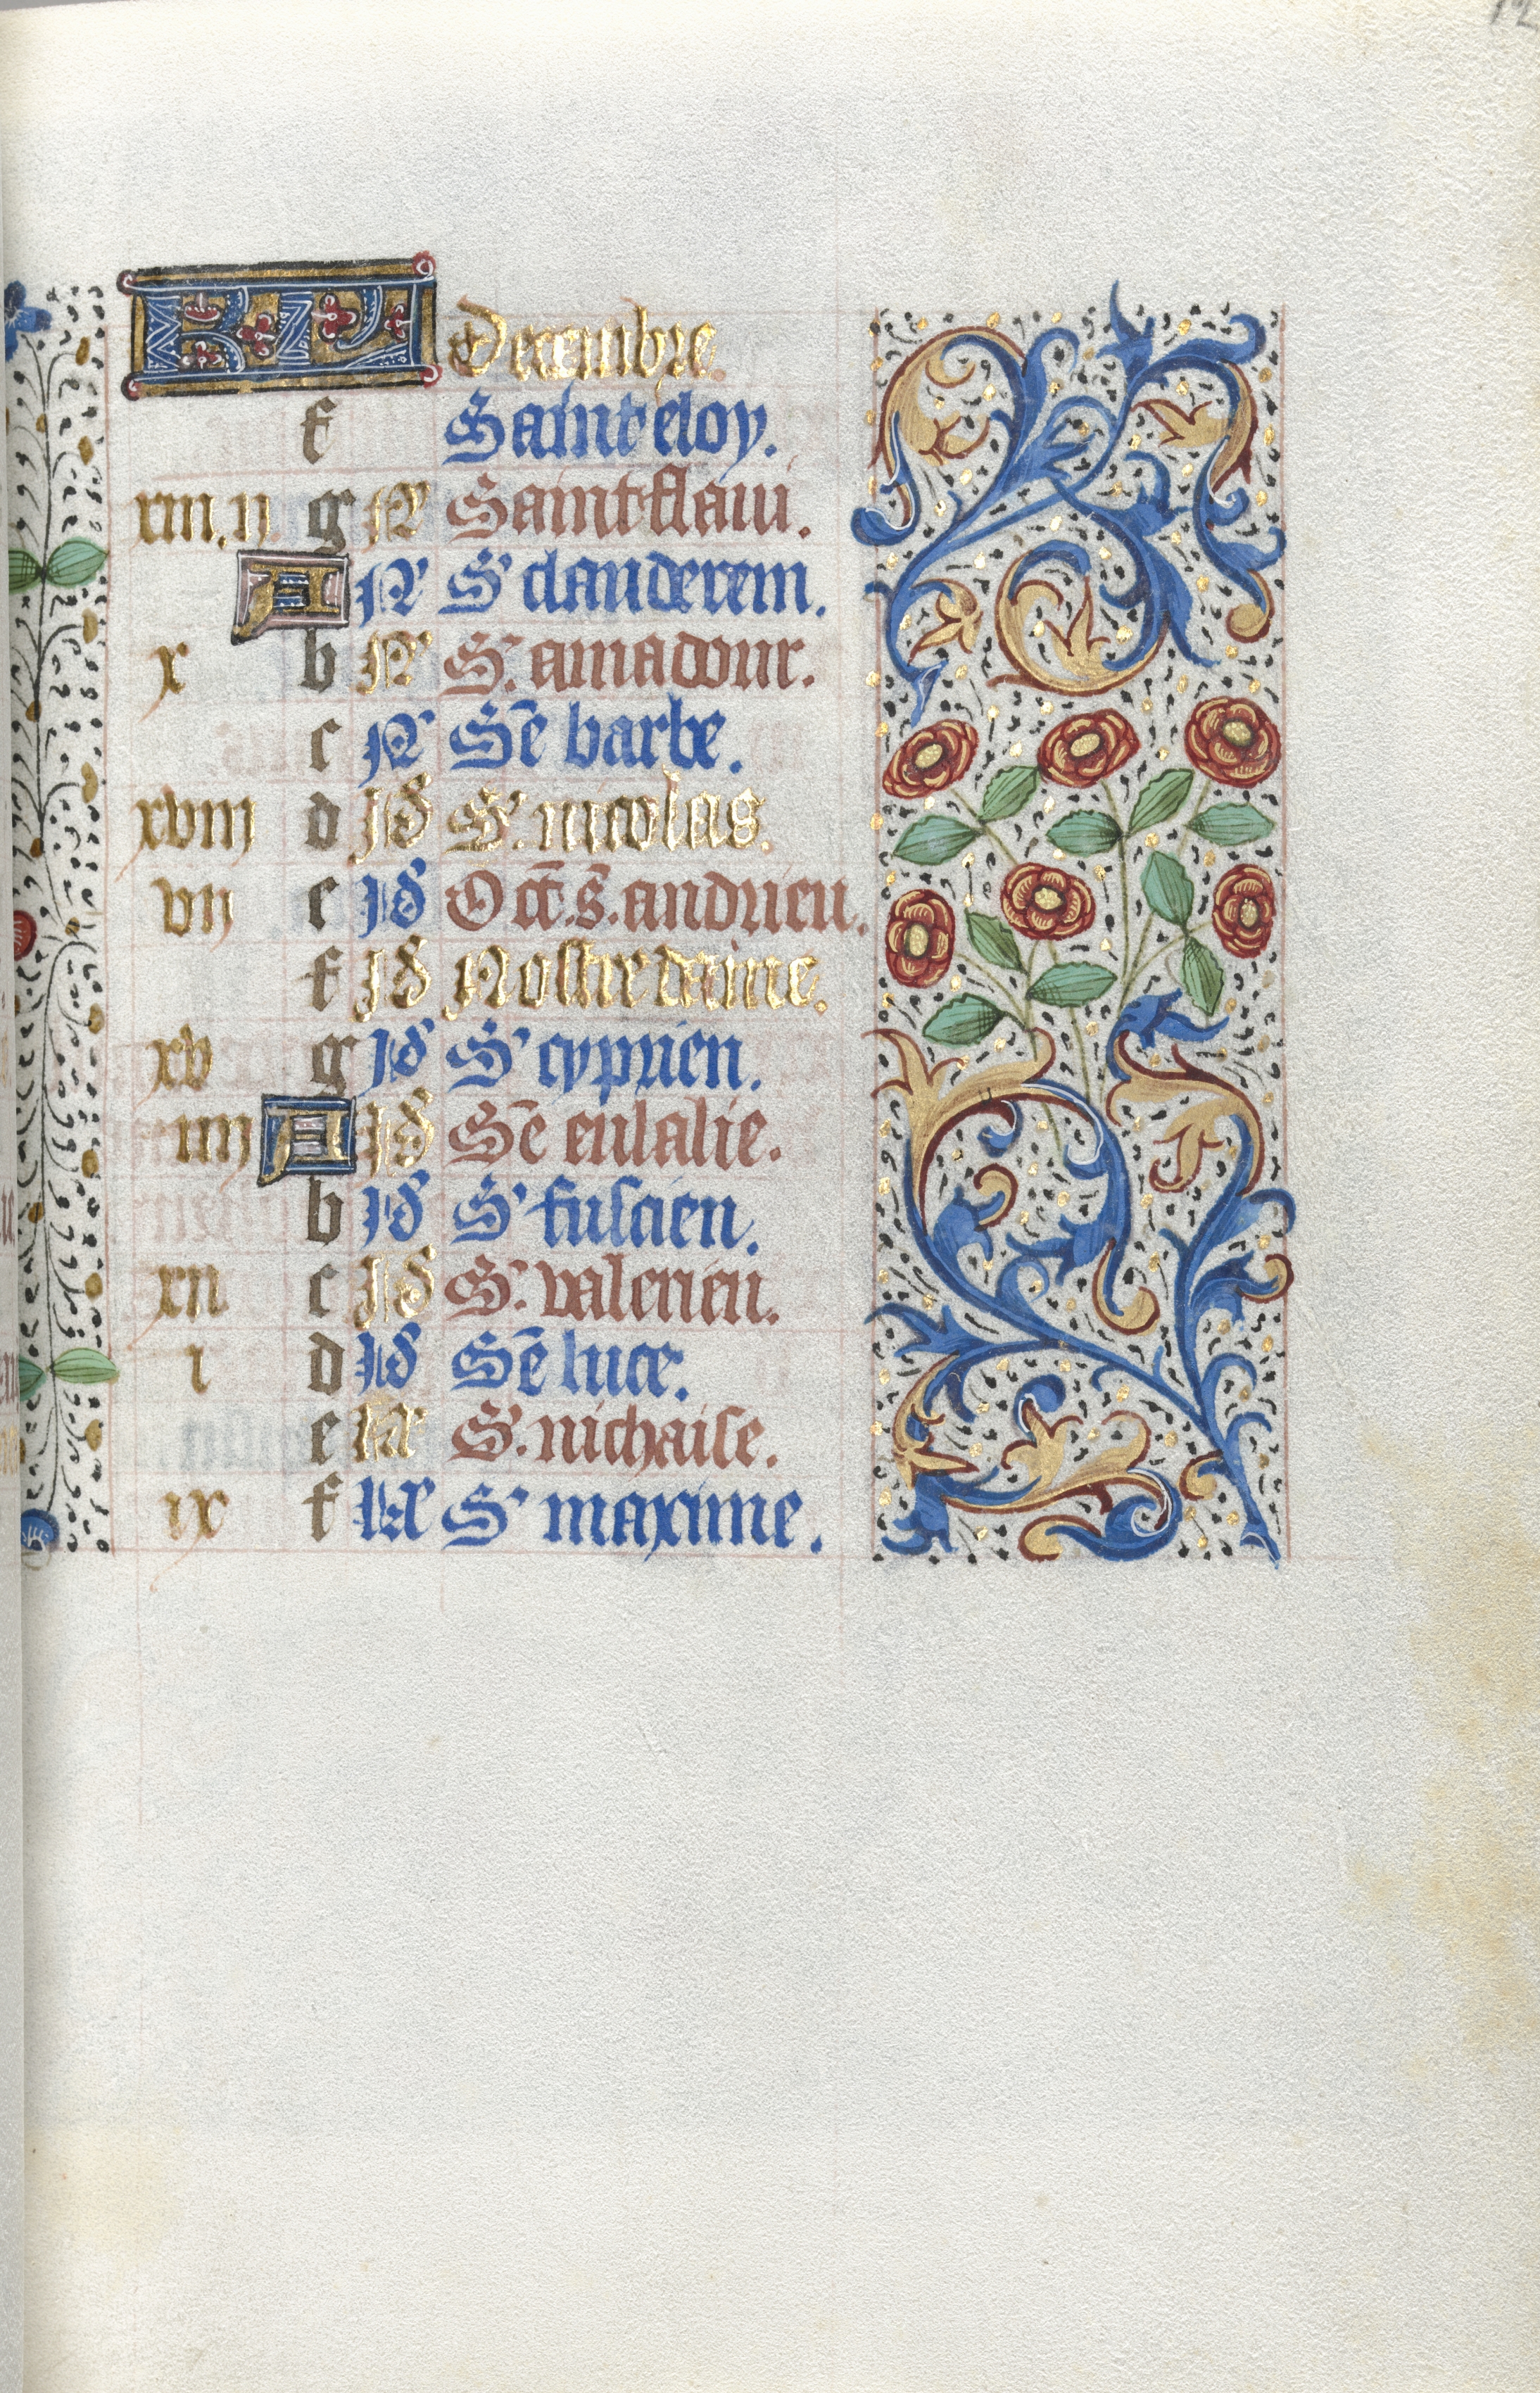 Book of Hours (Use of Rouen): fol. 12r, Calendar Page for December